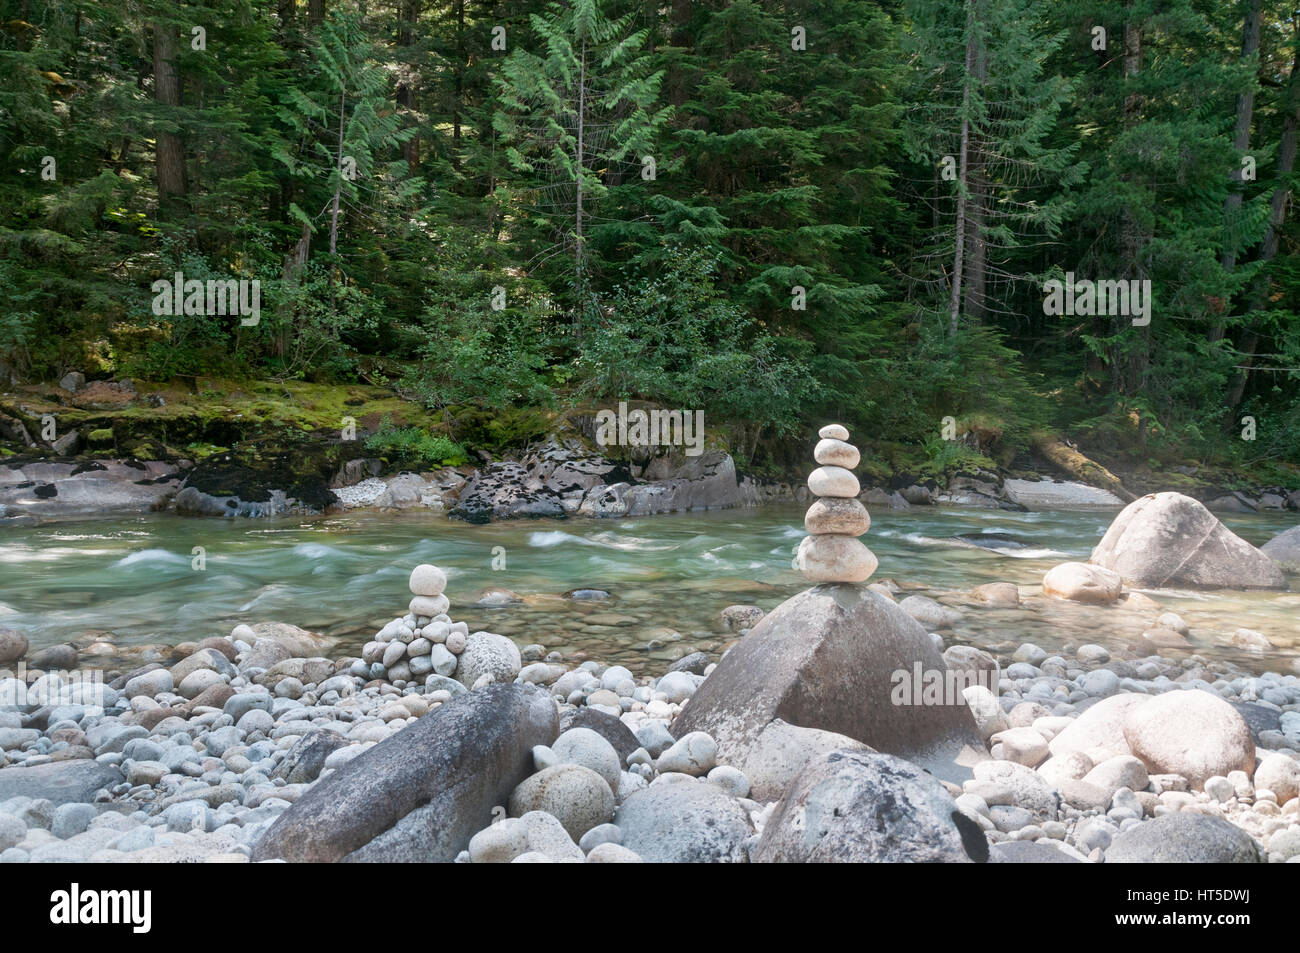 Stones stacked on a large rock beside a river in the forest Stock Photo